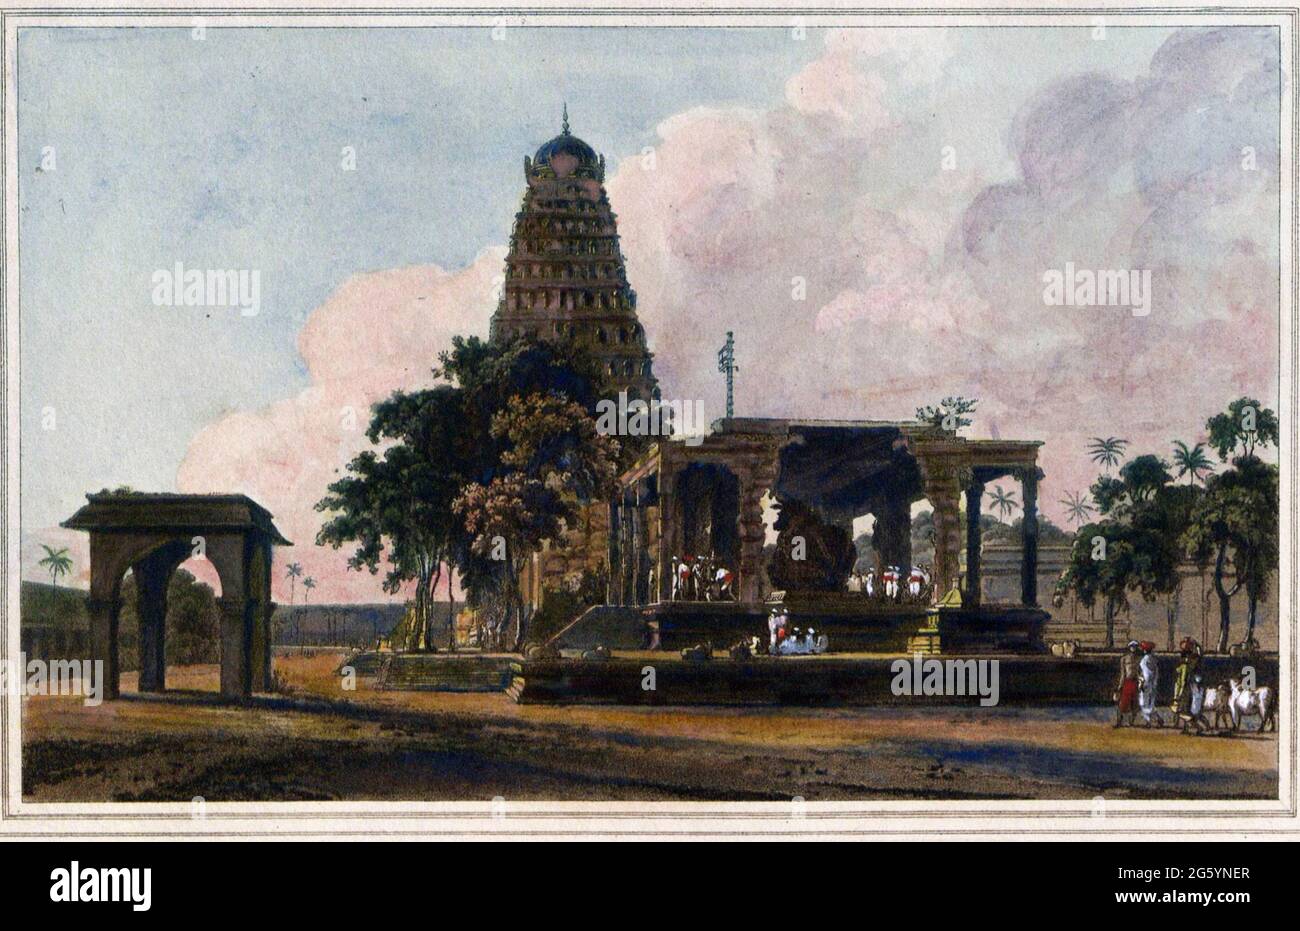 The Great Bull, An Hindoo Idol, At Tanjore [Thanjavur] From the book ' Oriental scenery: one hundred and fifty views of the architecture, antiquities and landscape scenery of Hindoostan ' by Thomas Daniell, and William Daniell, Published in London by the Authors July 1, 1812 Stock Photo